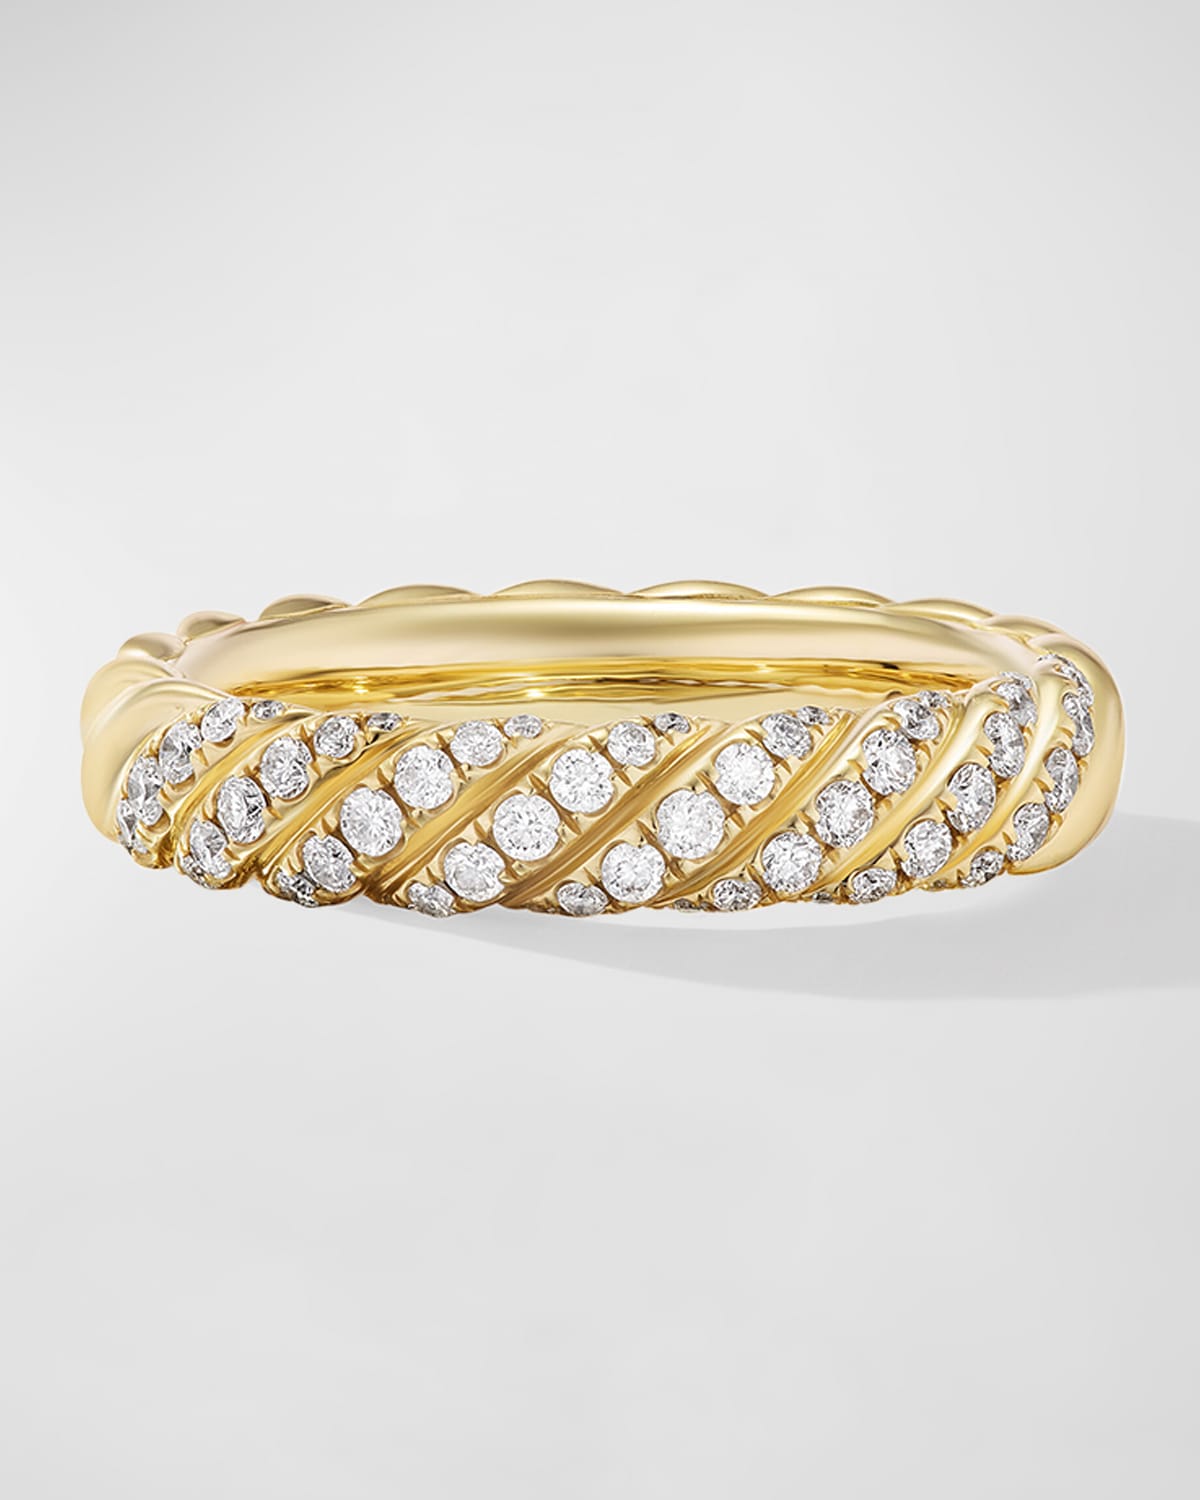 David Yurman Sculpted Cable Band Ring with Diamonds in 18K Gold, 4.5mm, Size 6